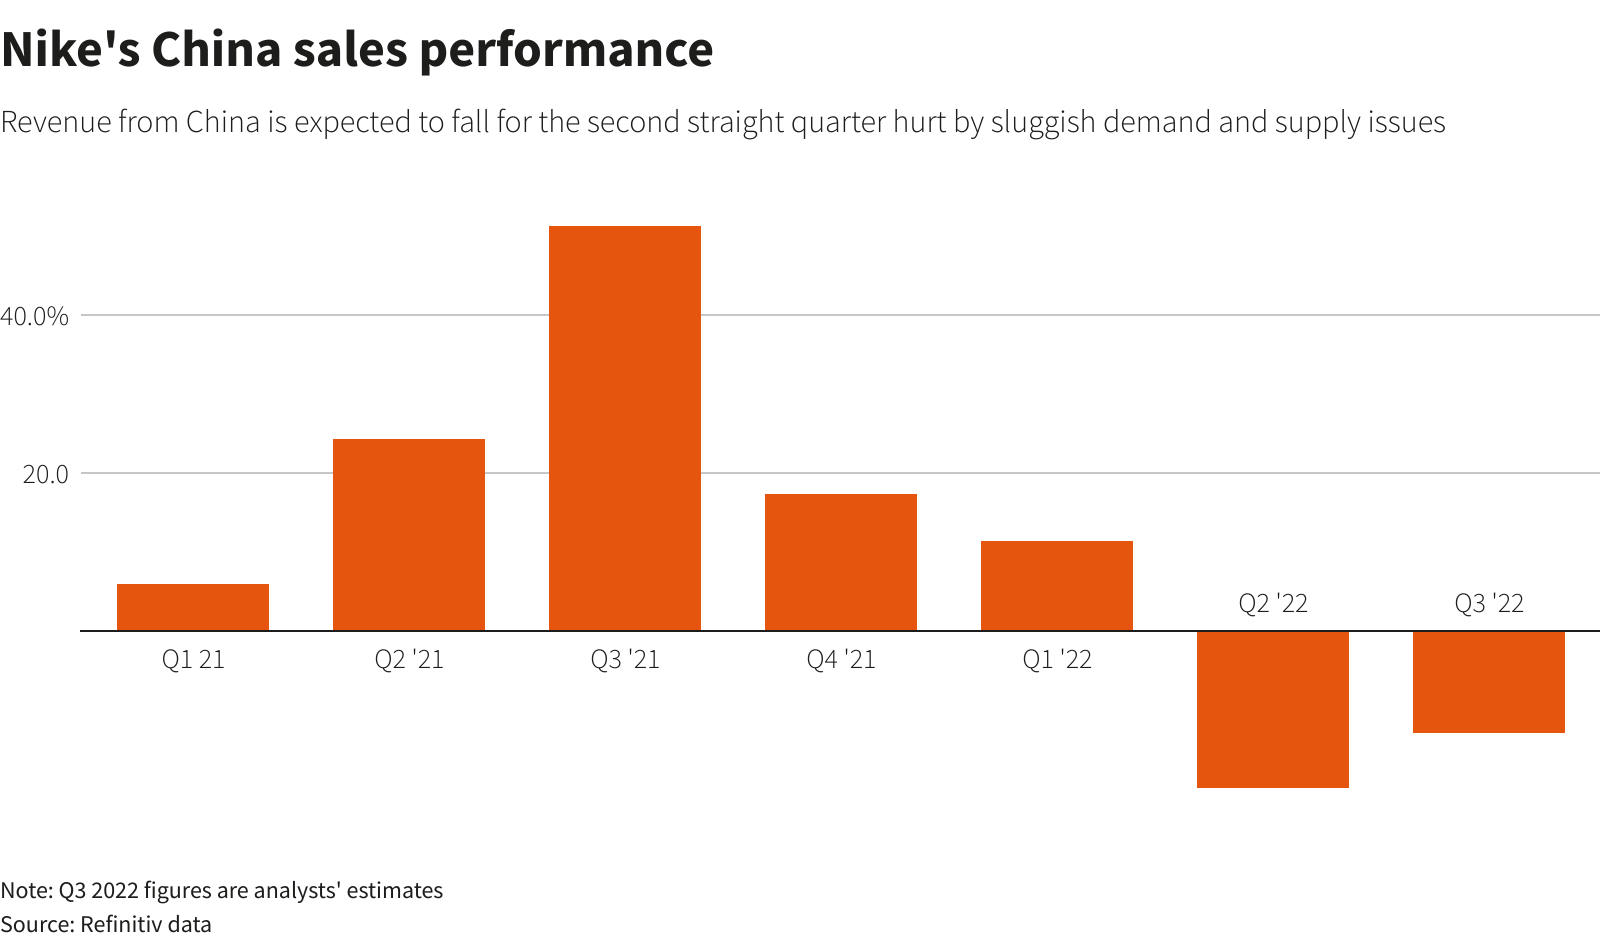 Nike sales performance in China